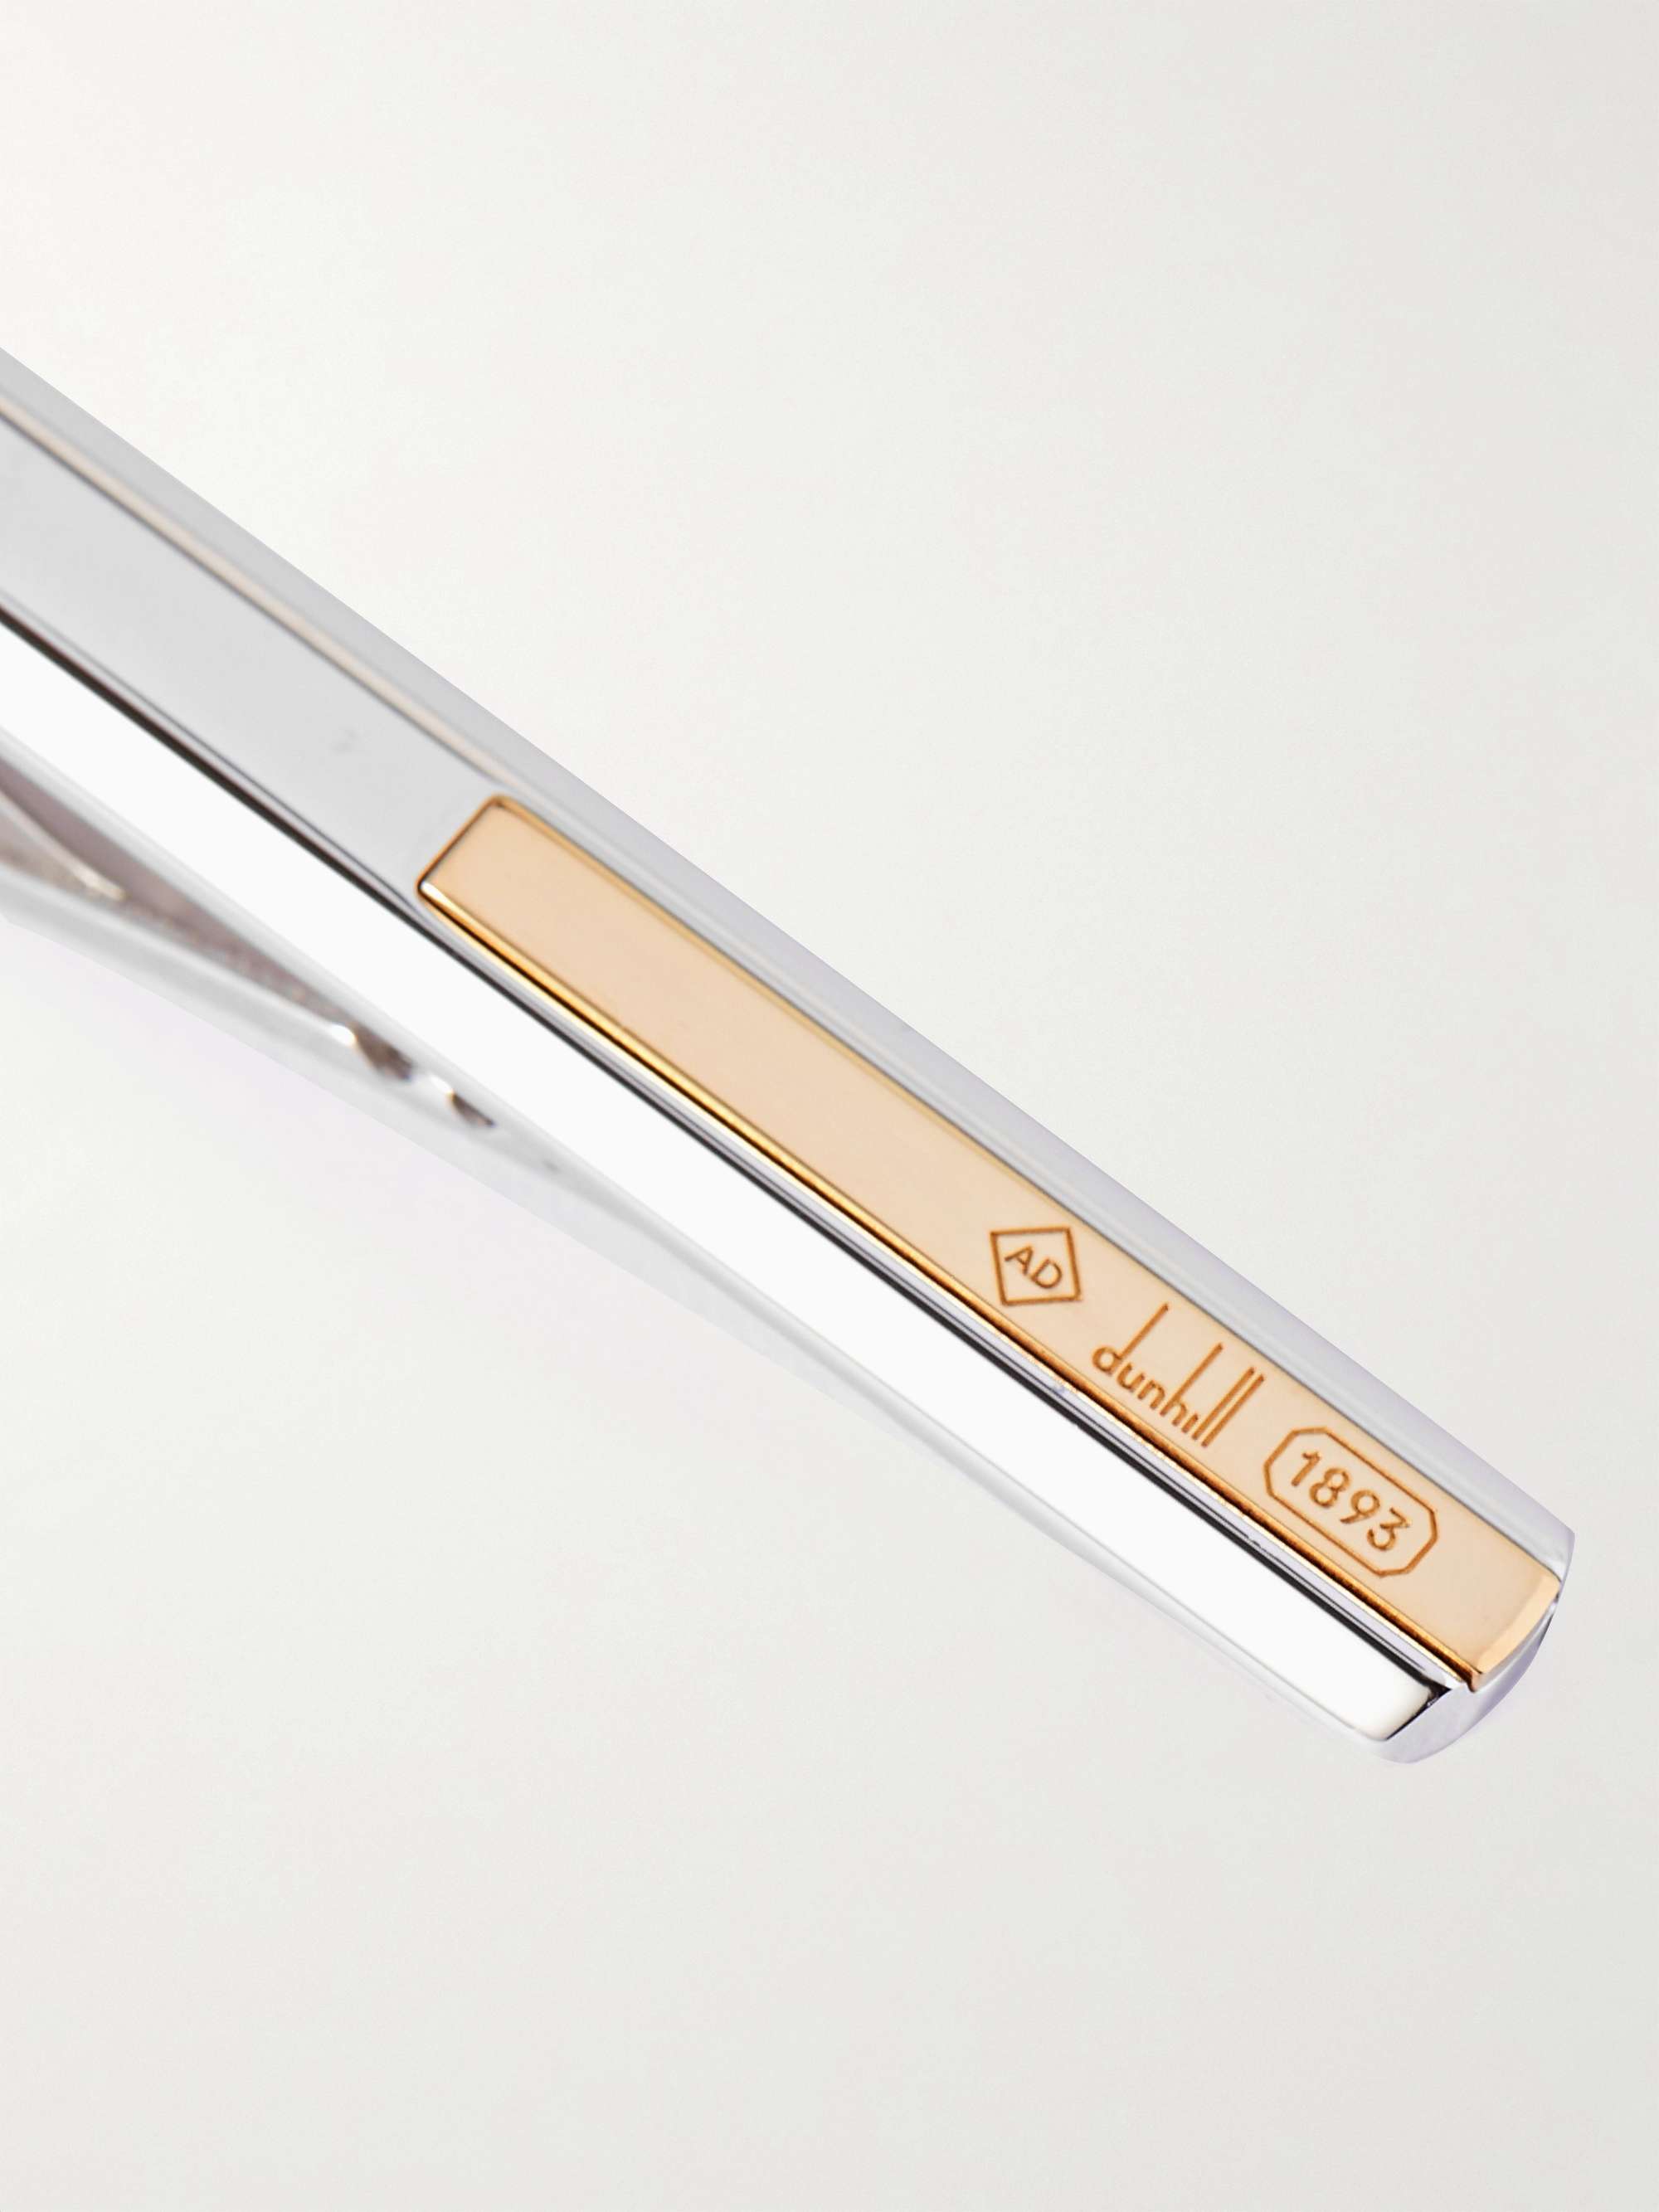 DUNHILL Gold-Plated and Sterling Silver Tie Bar